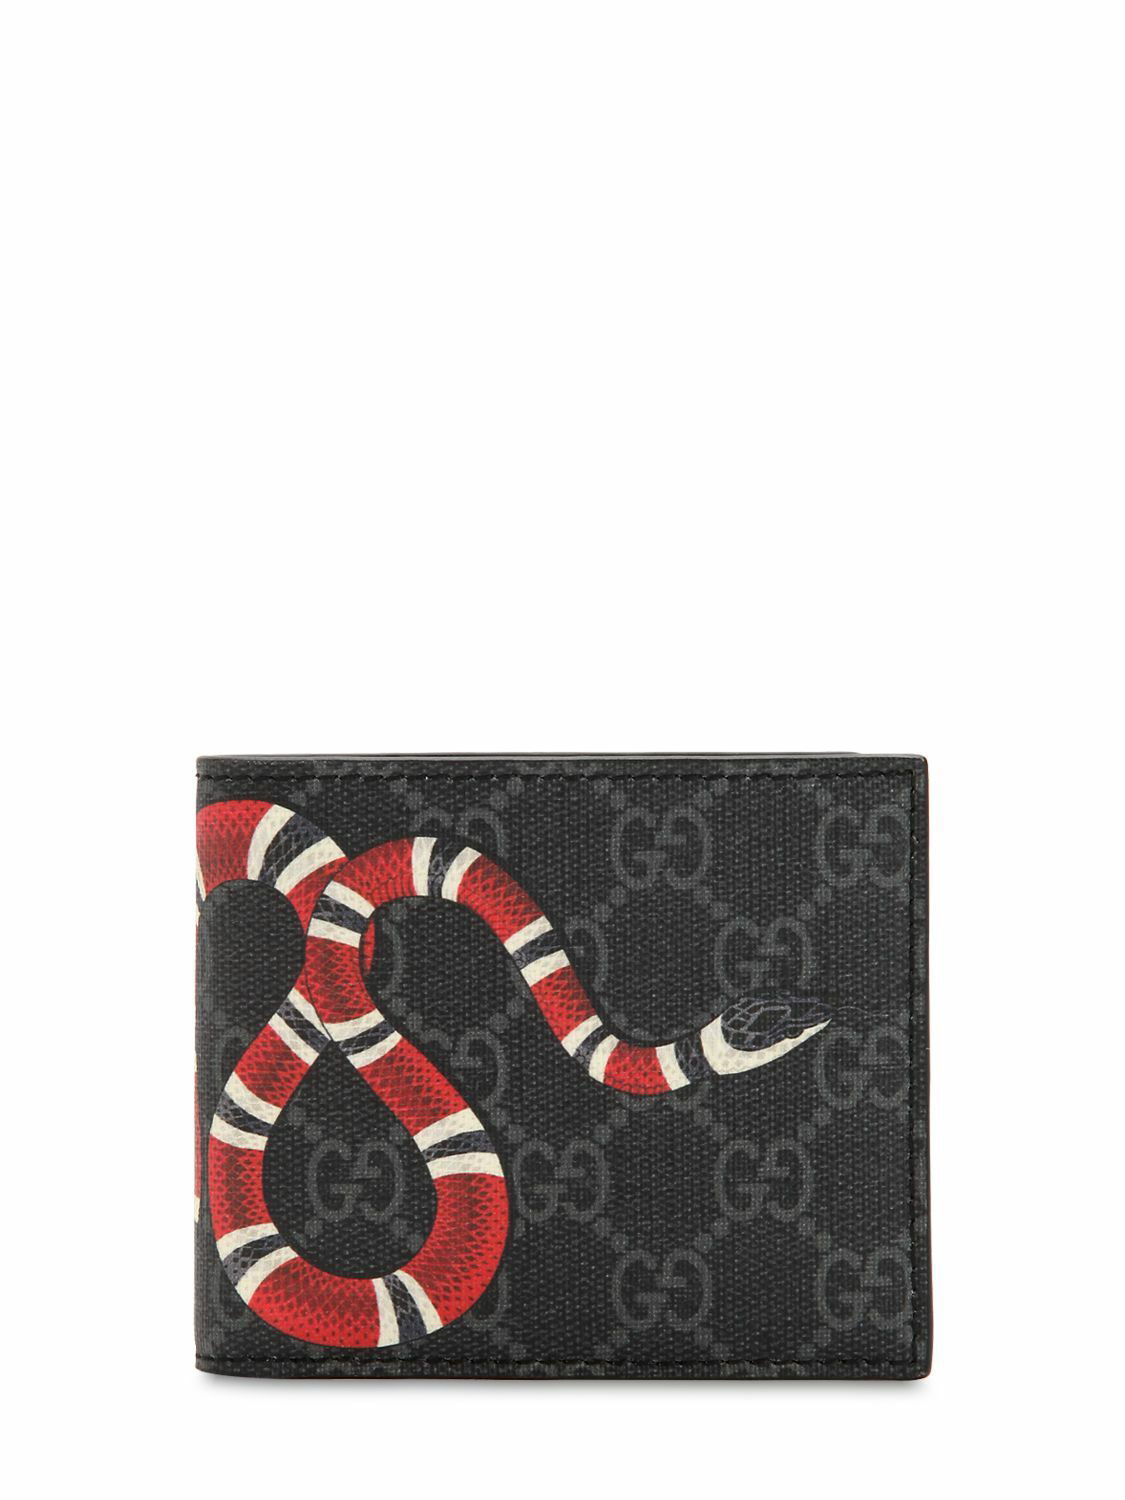 Photo: GUCCI Snake Printed Coated Canvas Wallet